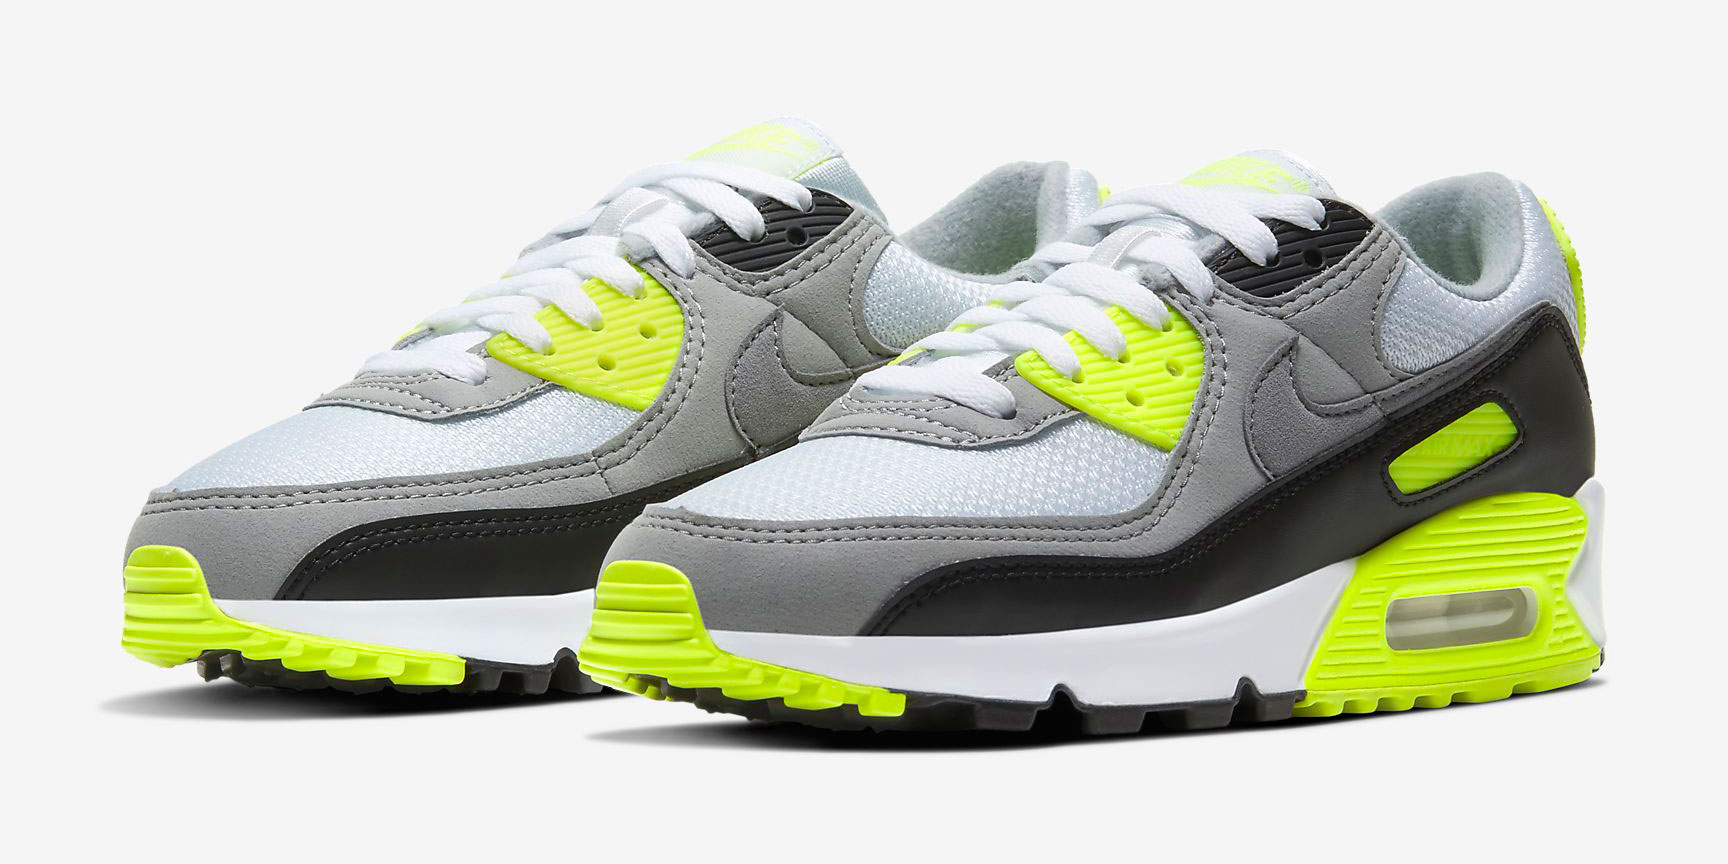 Nike Air Max 90 OG Volt Clothing to Match | SneakerFits.com